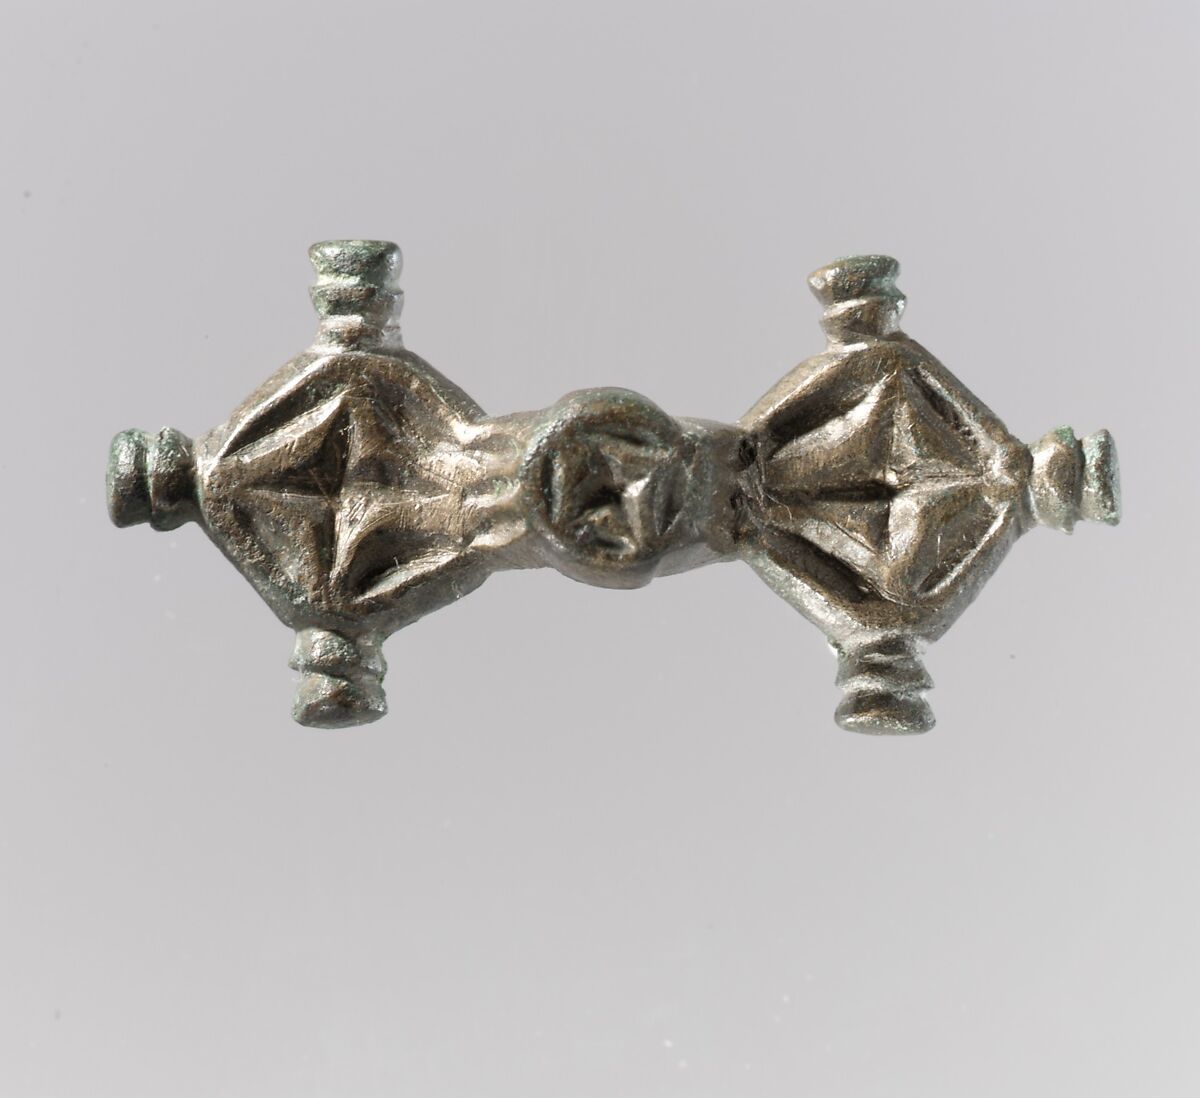 Equal-Arm Brooch with Cross Decoration, Copper alloy, Frankish 